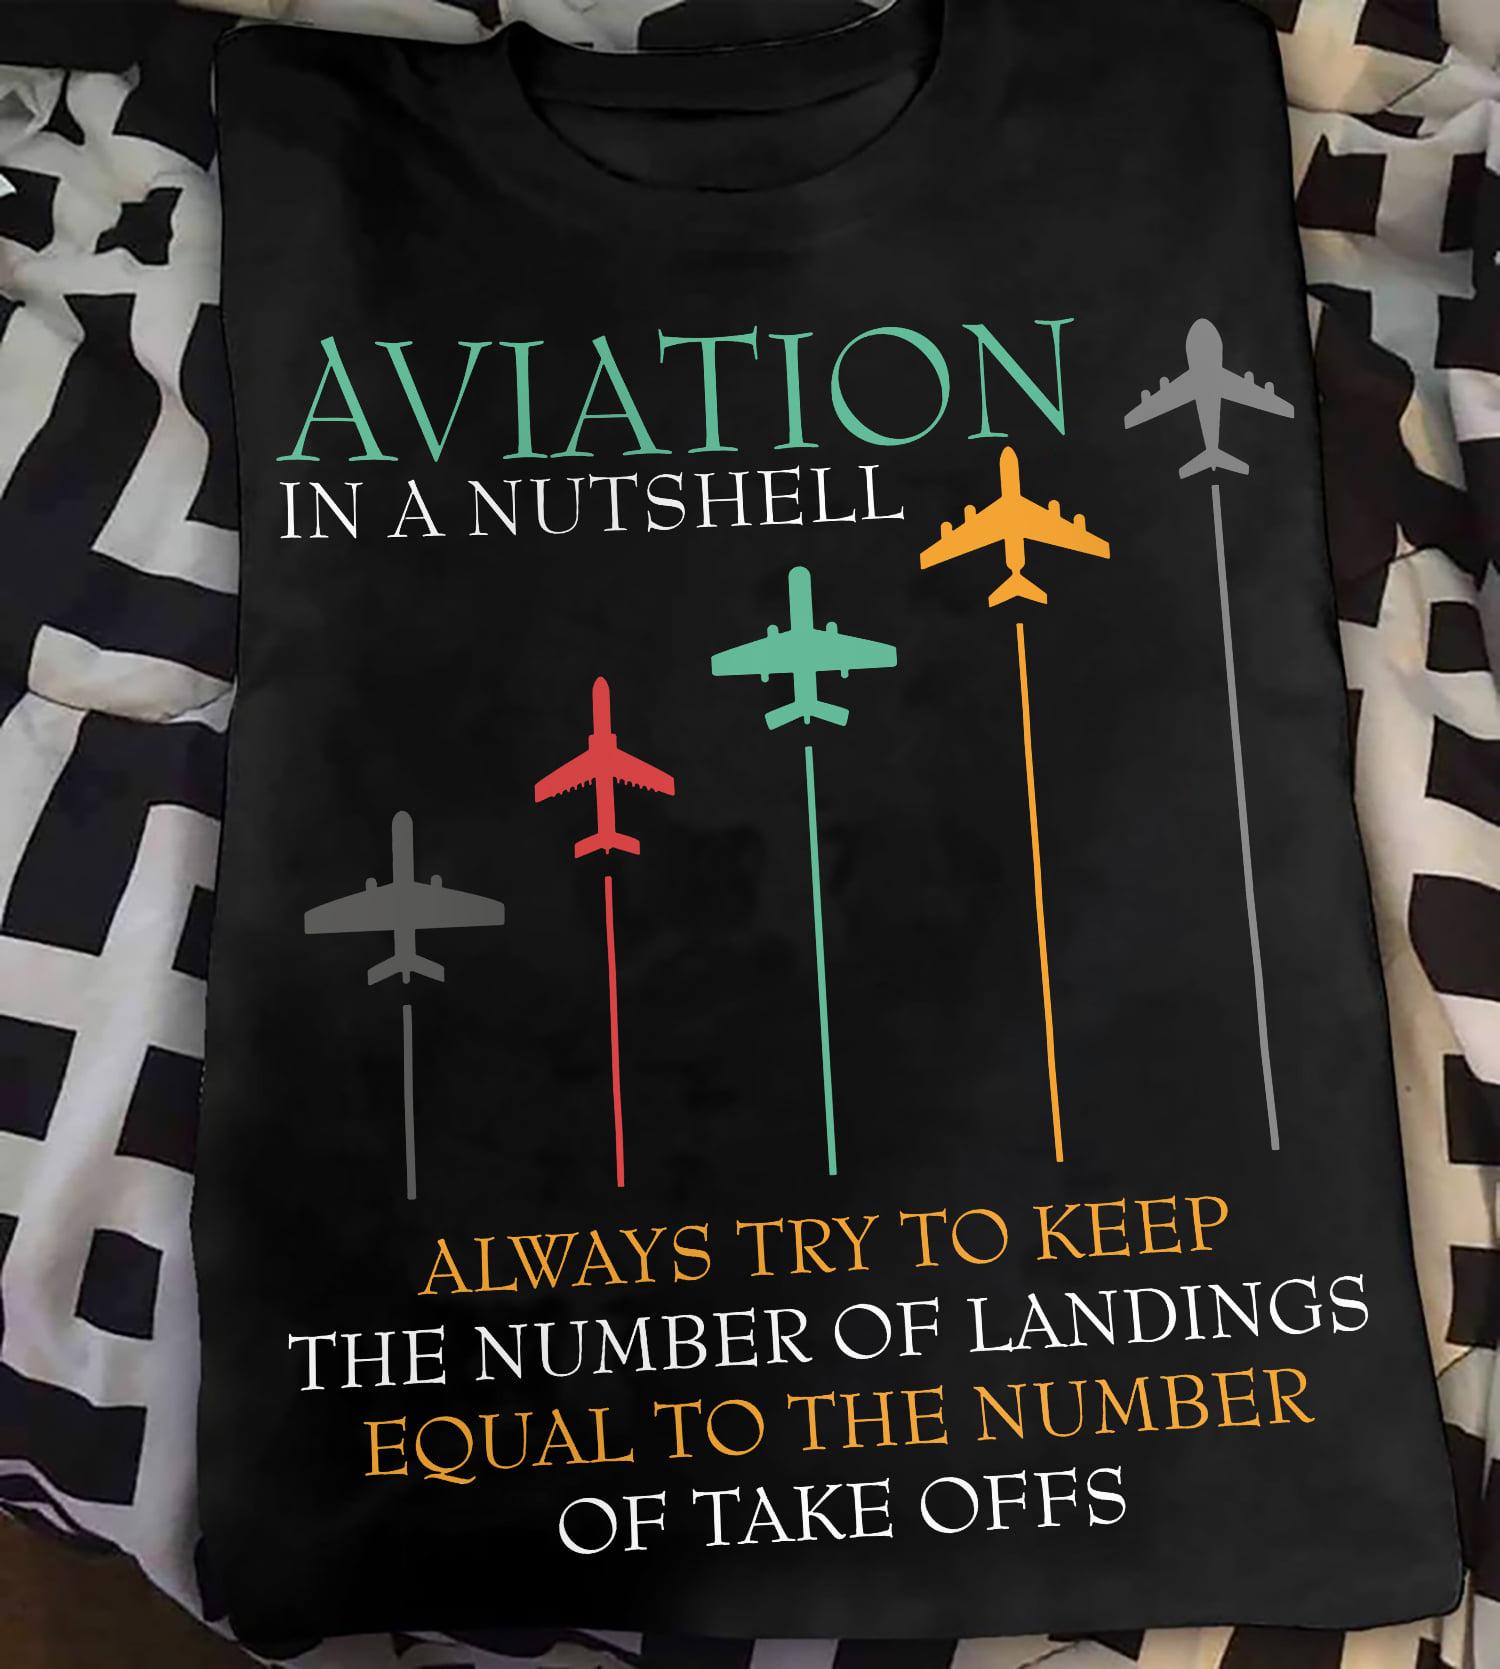 Aviation in a nutshell - Always try to keep the number of landings equal to the number of take offs